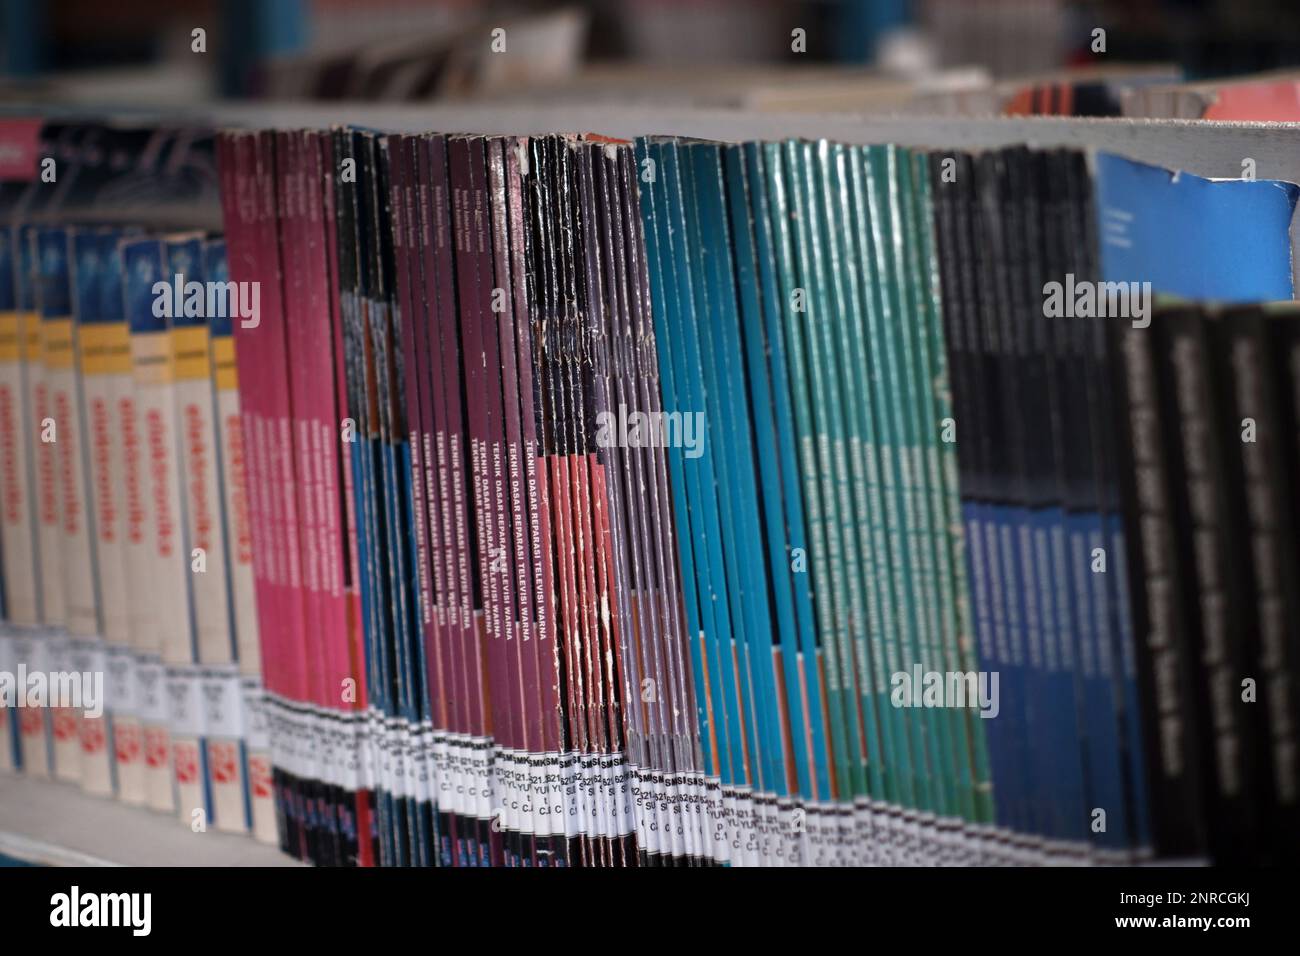 School Textbooks Neatly Arranged On An Iron Shelf, In The Air Belo Village School Library During The Day Stock Photo